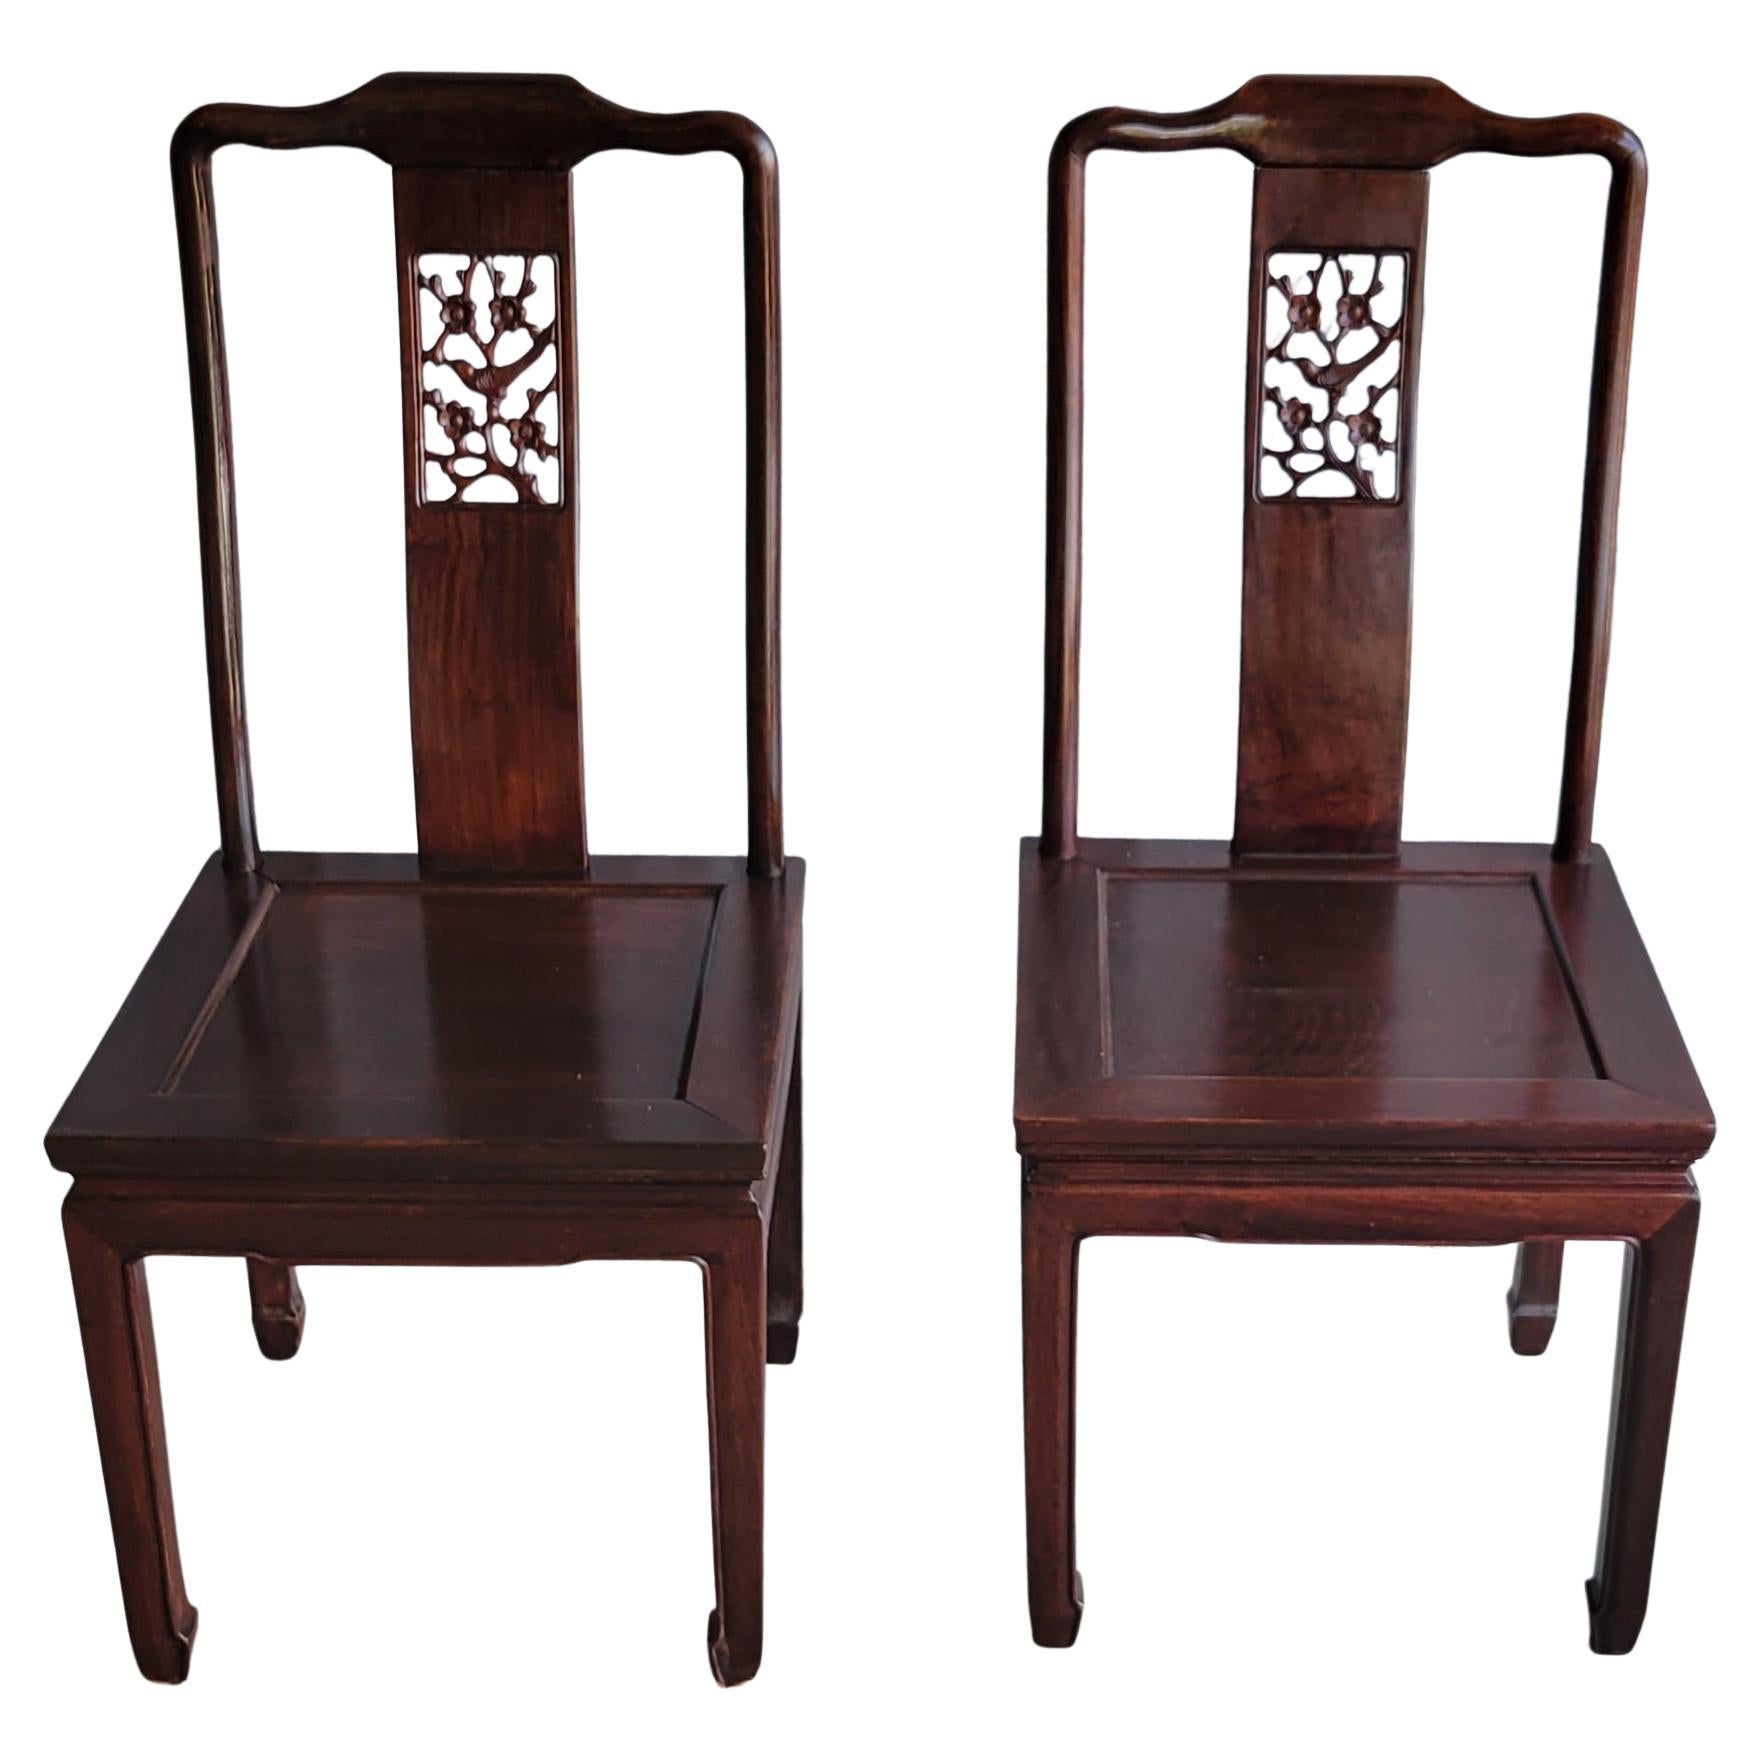 Vintage George Zee and Co. Mahogany Side Chairs - set of 2 For Sale